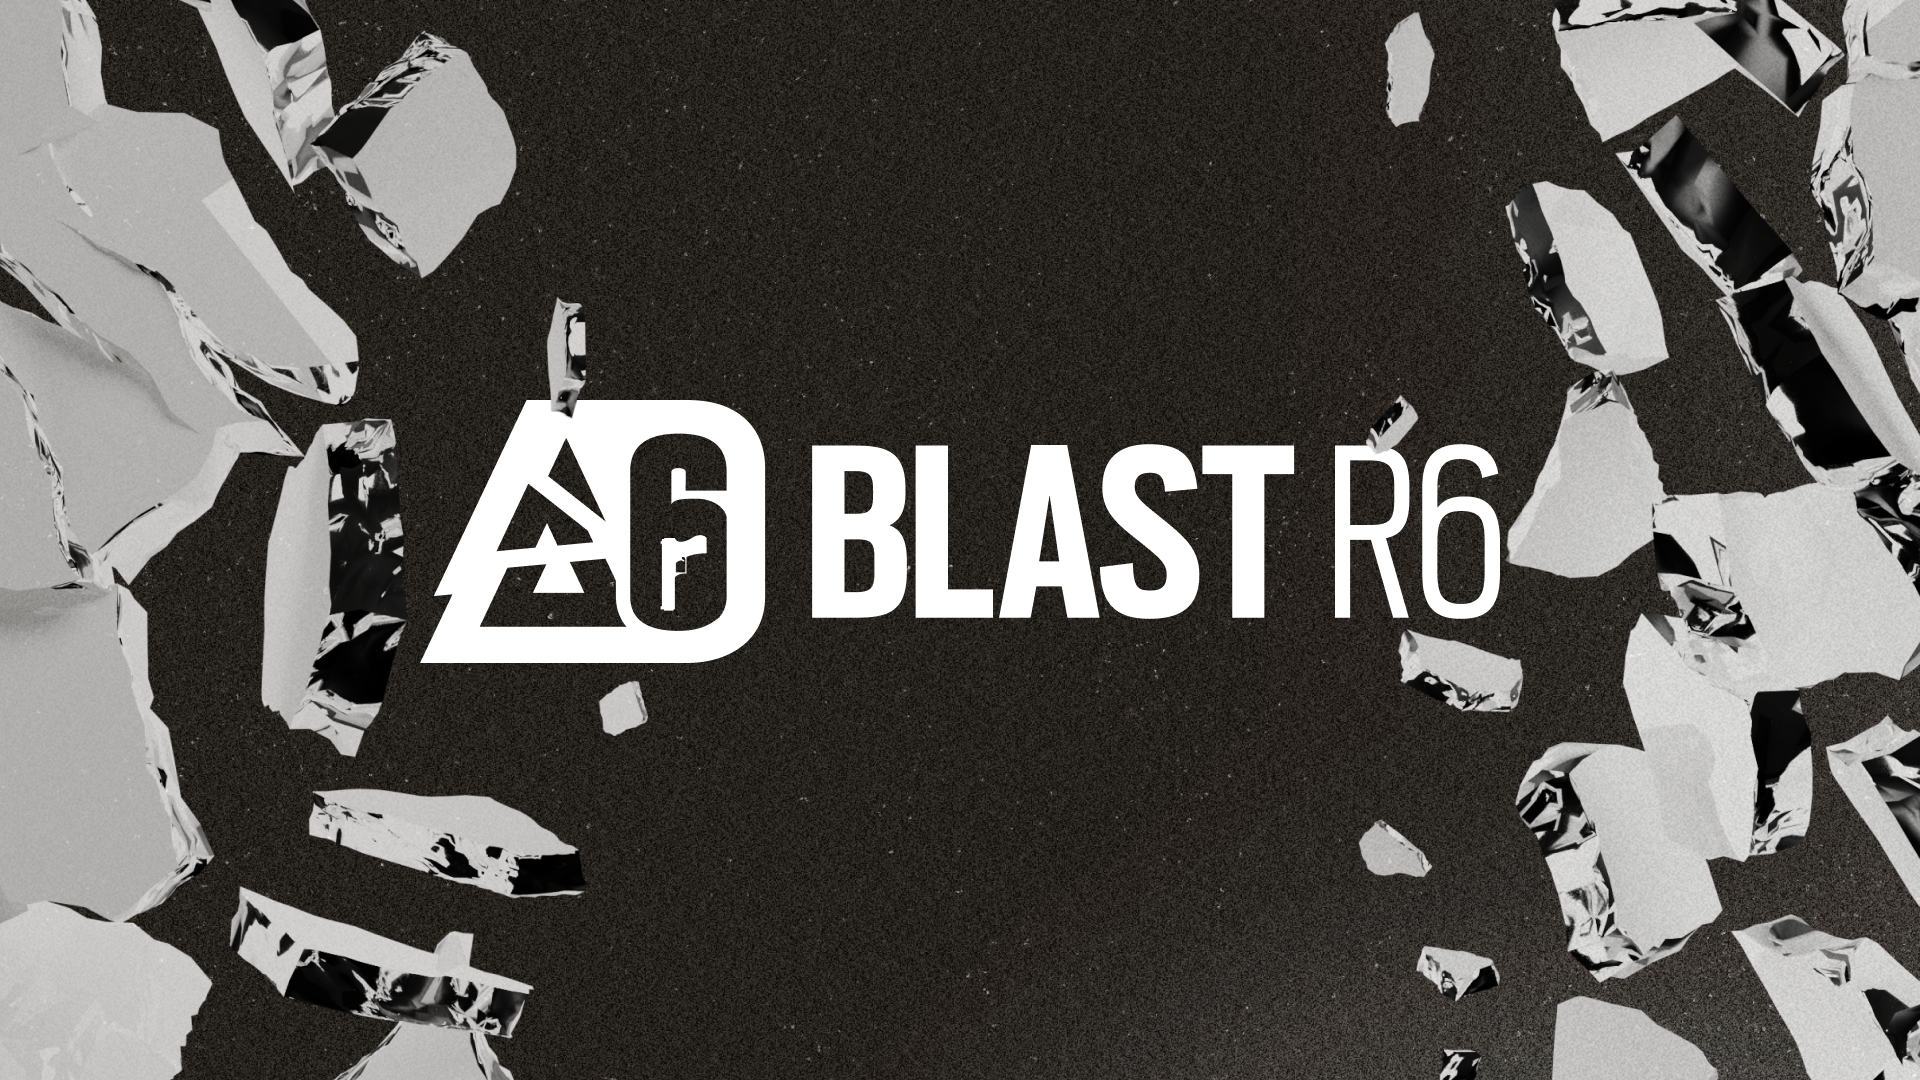 Ubisoft teams up with BLAST for a new Rainbow Six Siege World Circuit